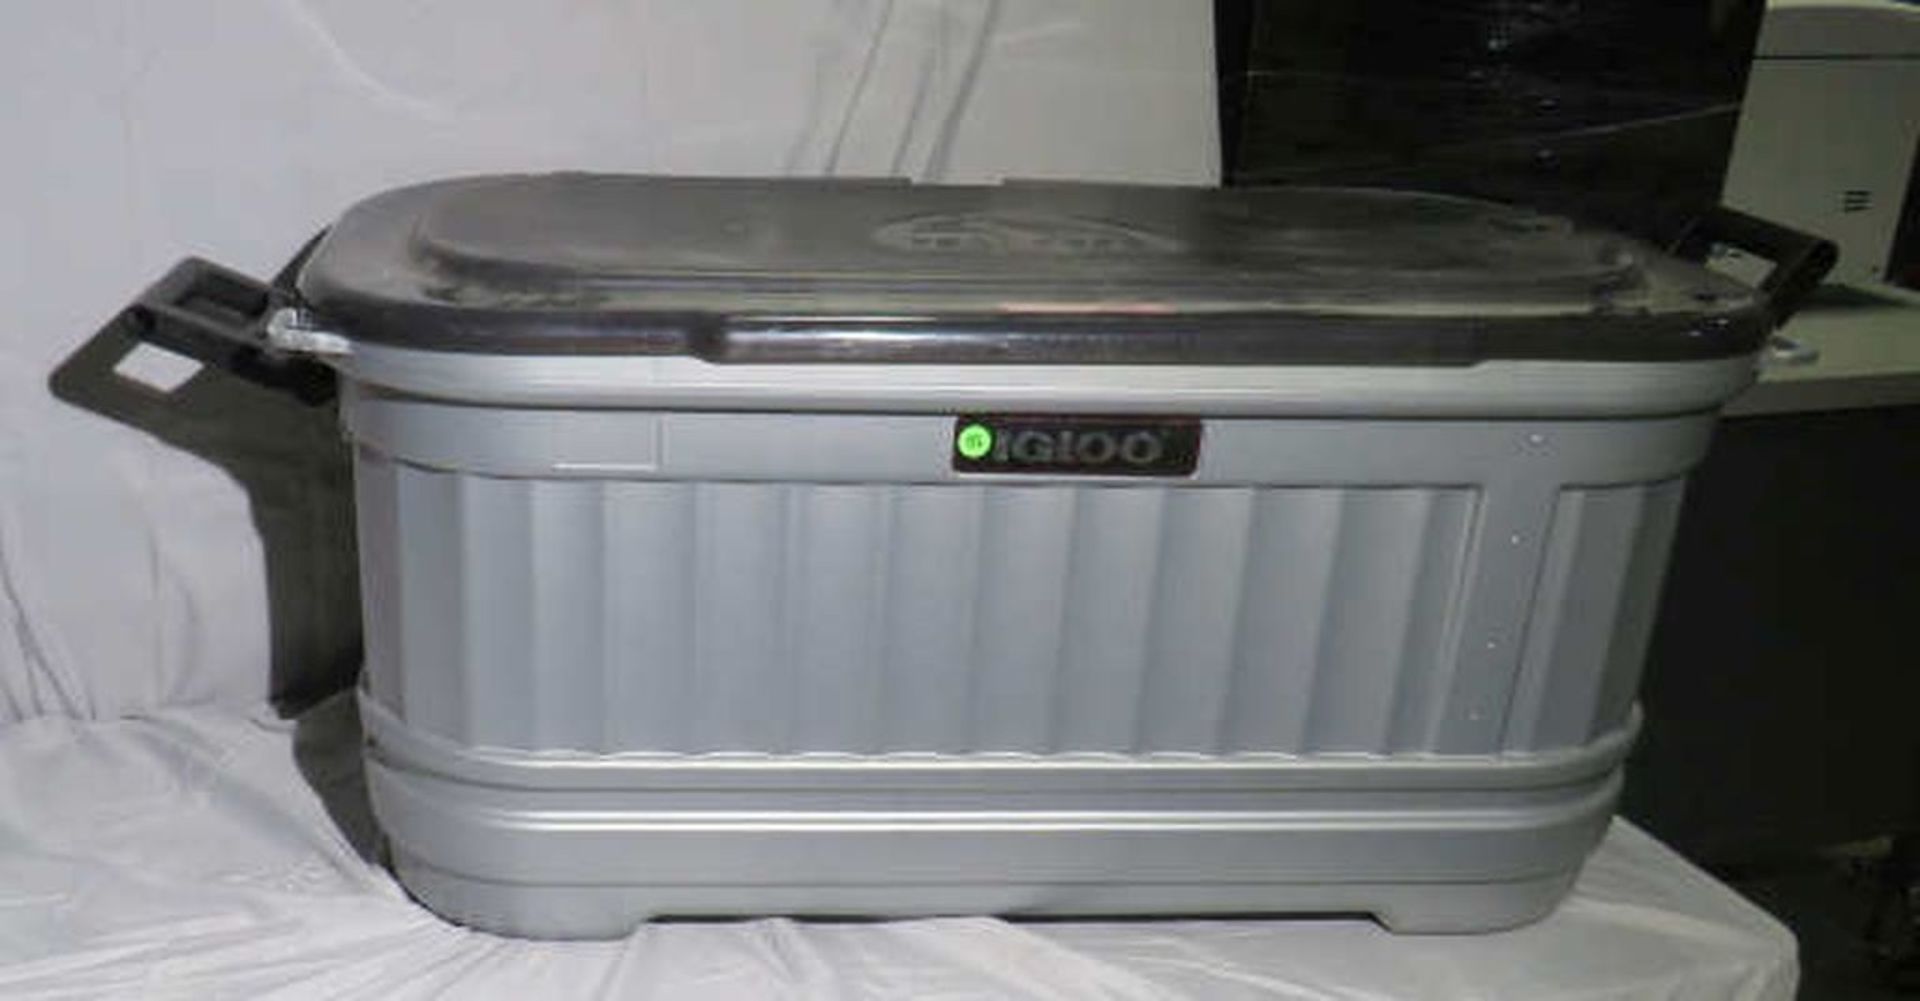 Igloo cooler party bar in shape of water trough 125 qt capacity